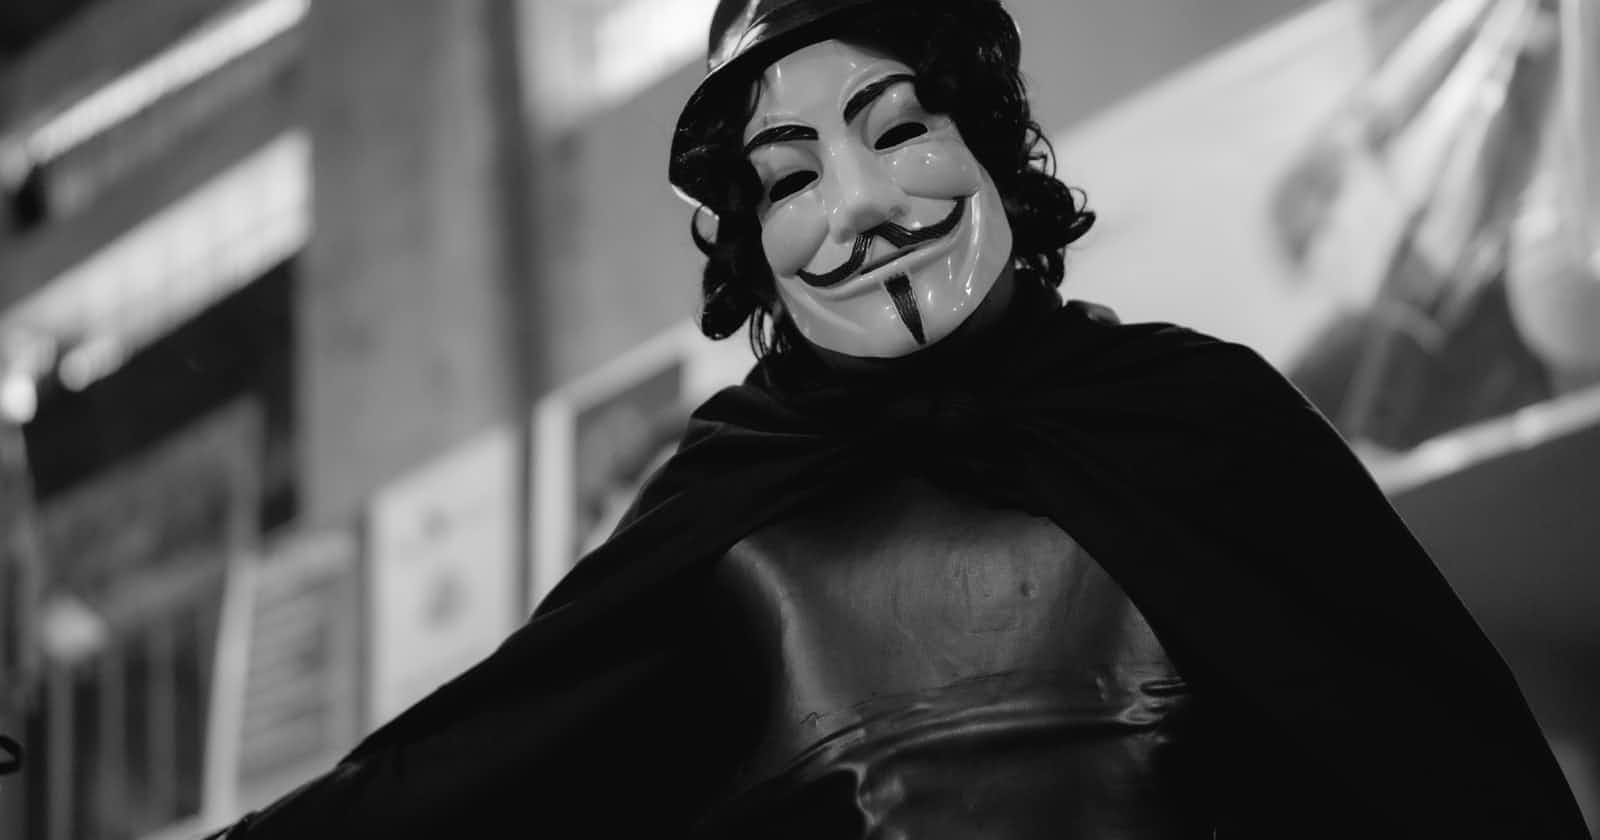 Powerful tools for keeping you anonymous